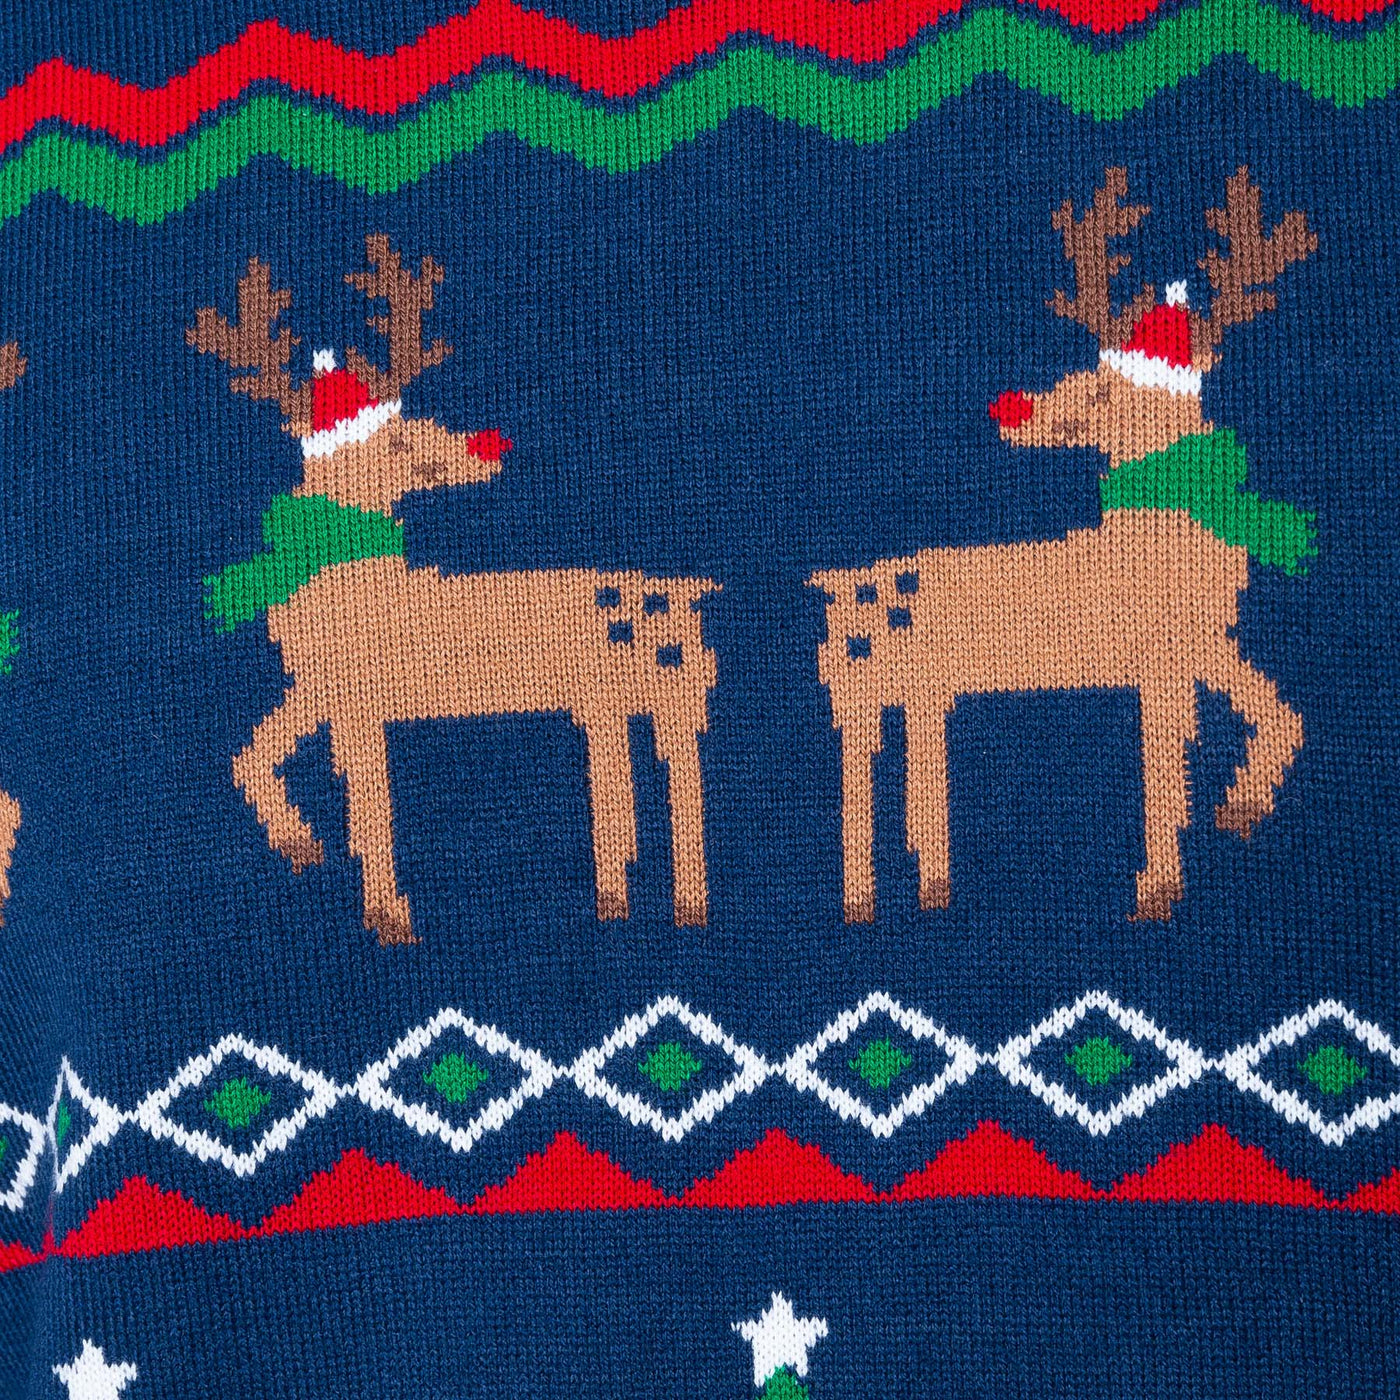 Men's Ugly Blue Christmas Sweater